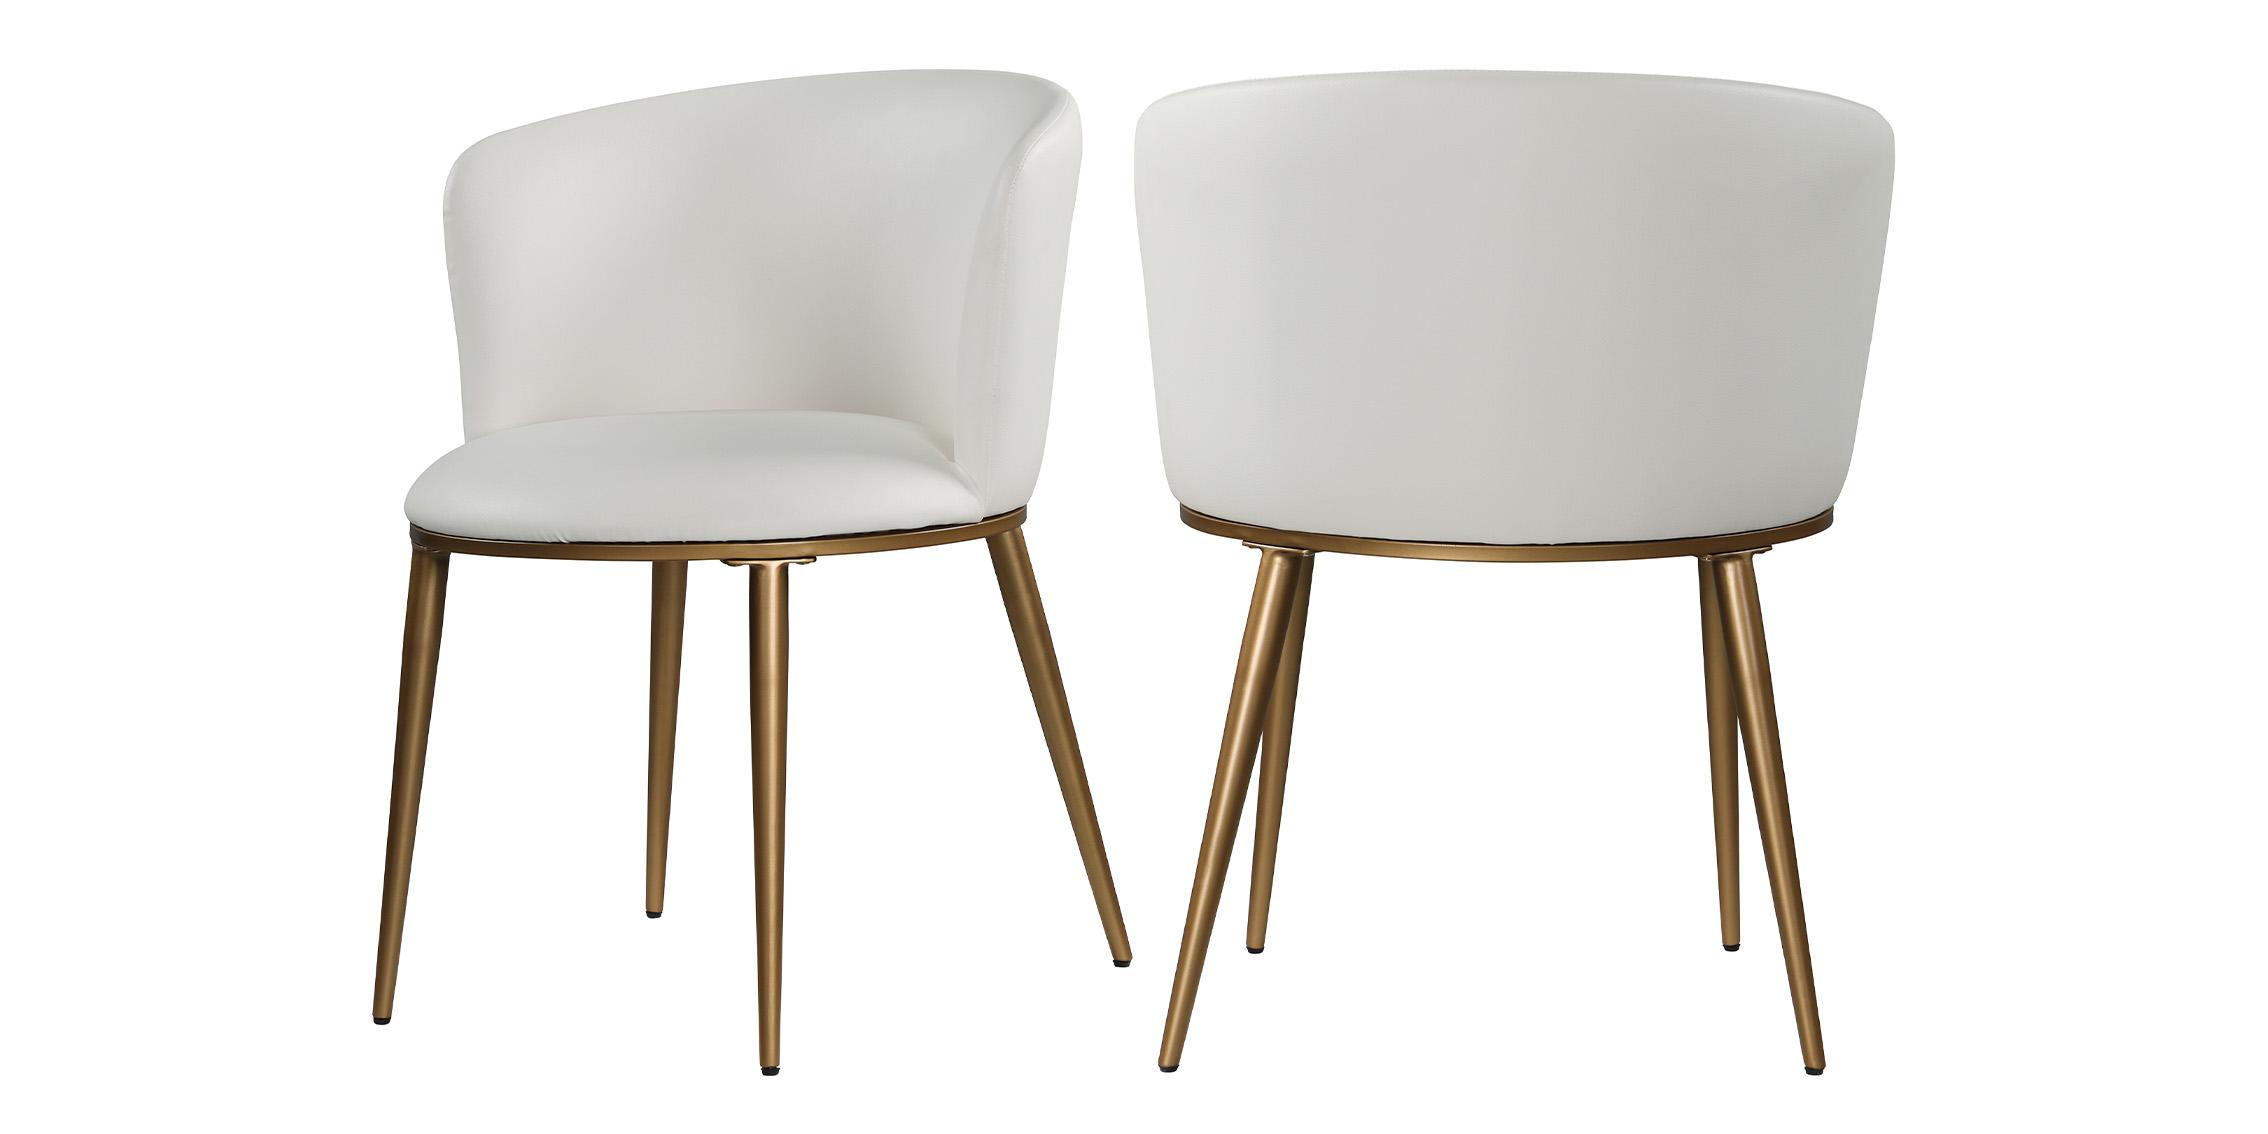 Contemporary, Modern Dining Chair Set SKYLAR 965White-C 965White-C in White, Gold Faux Leather